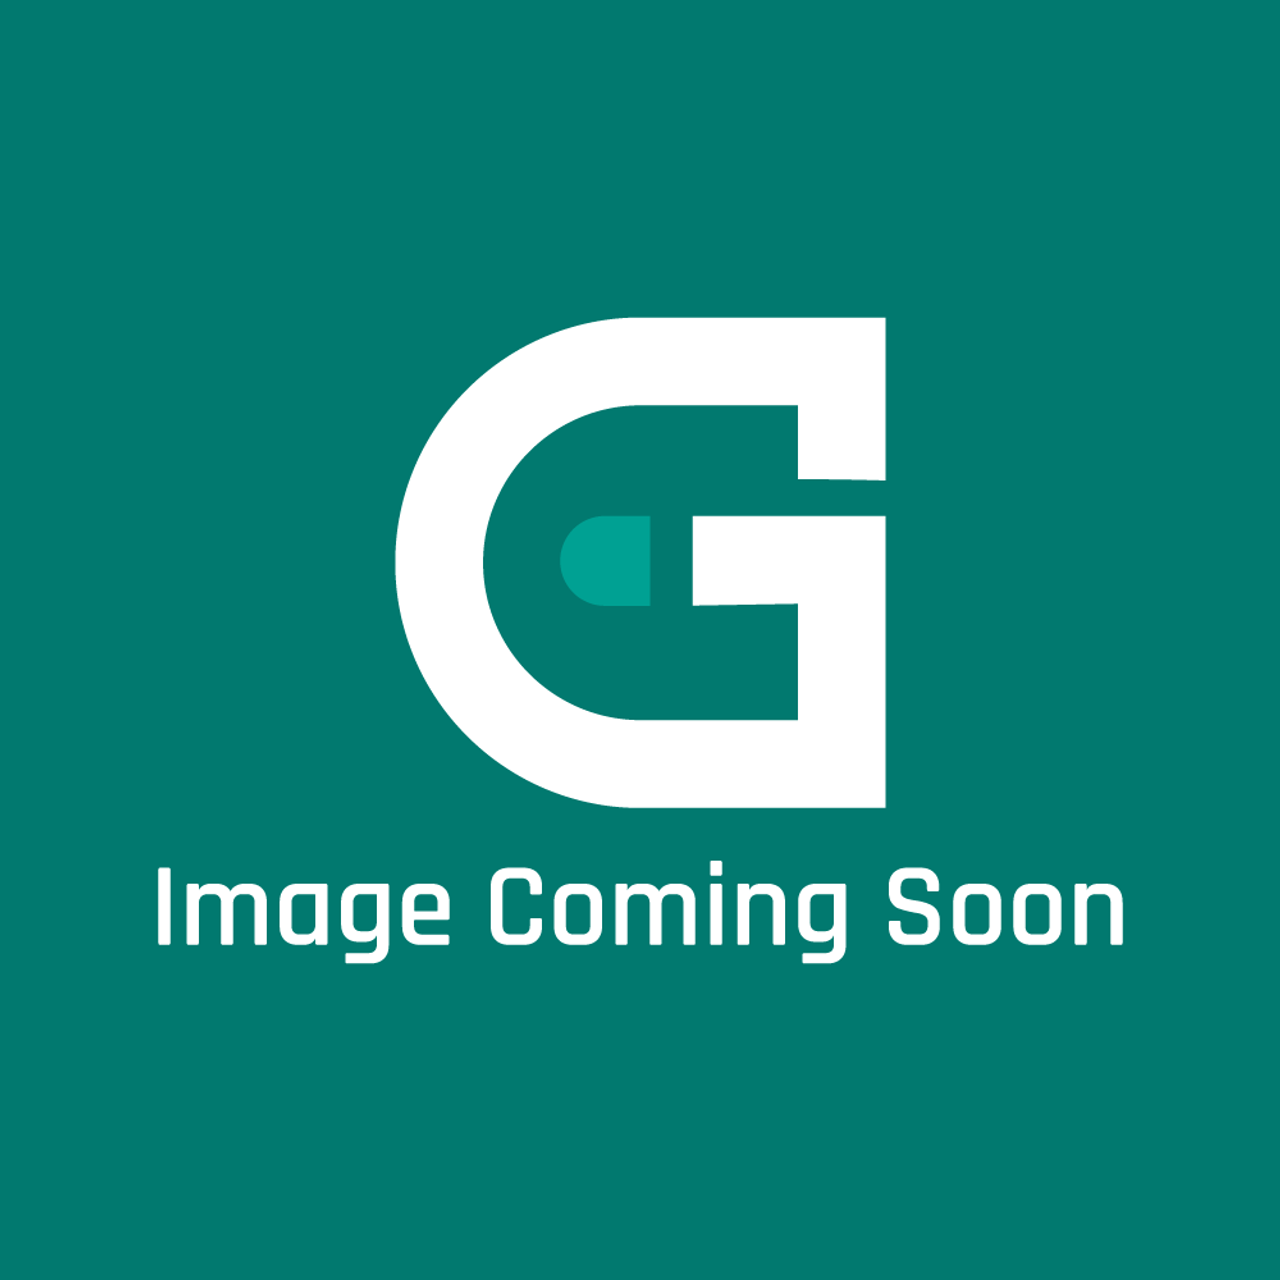 AGA Marvel S41016345-ACCY - Claris Filter Head 3/8 Npt - Image Coming Soon!